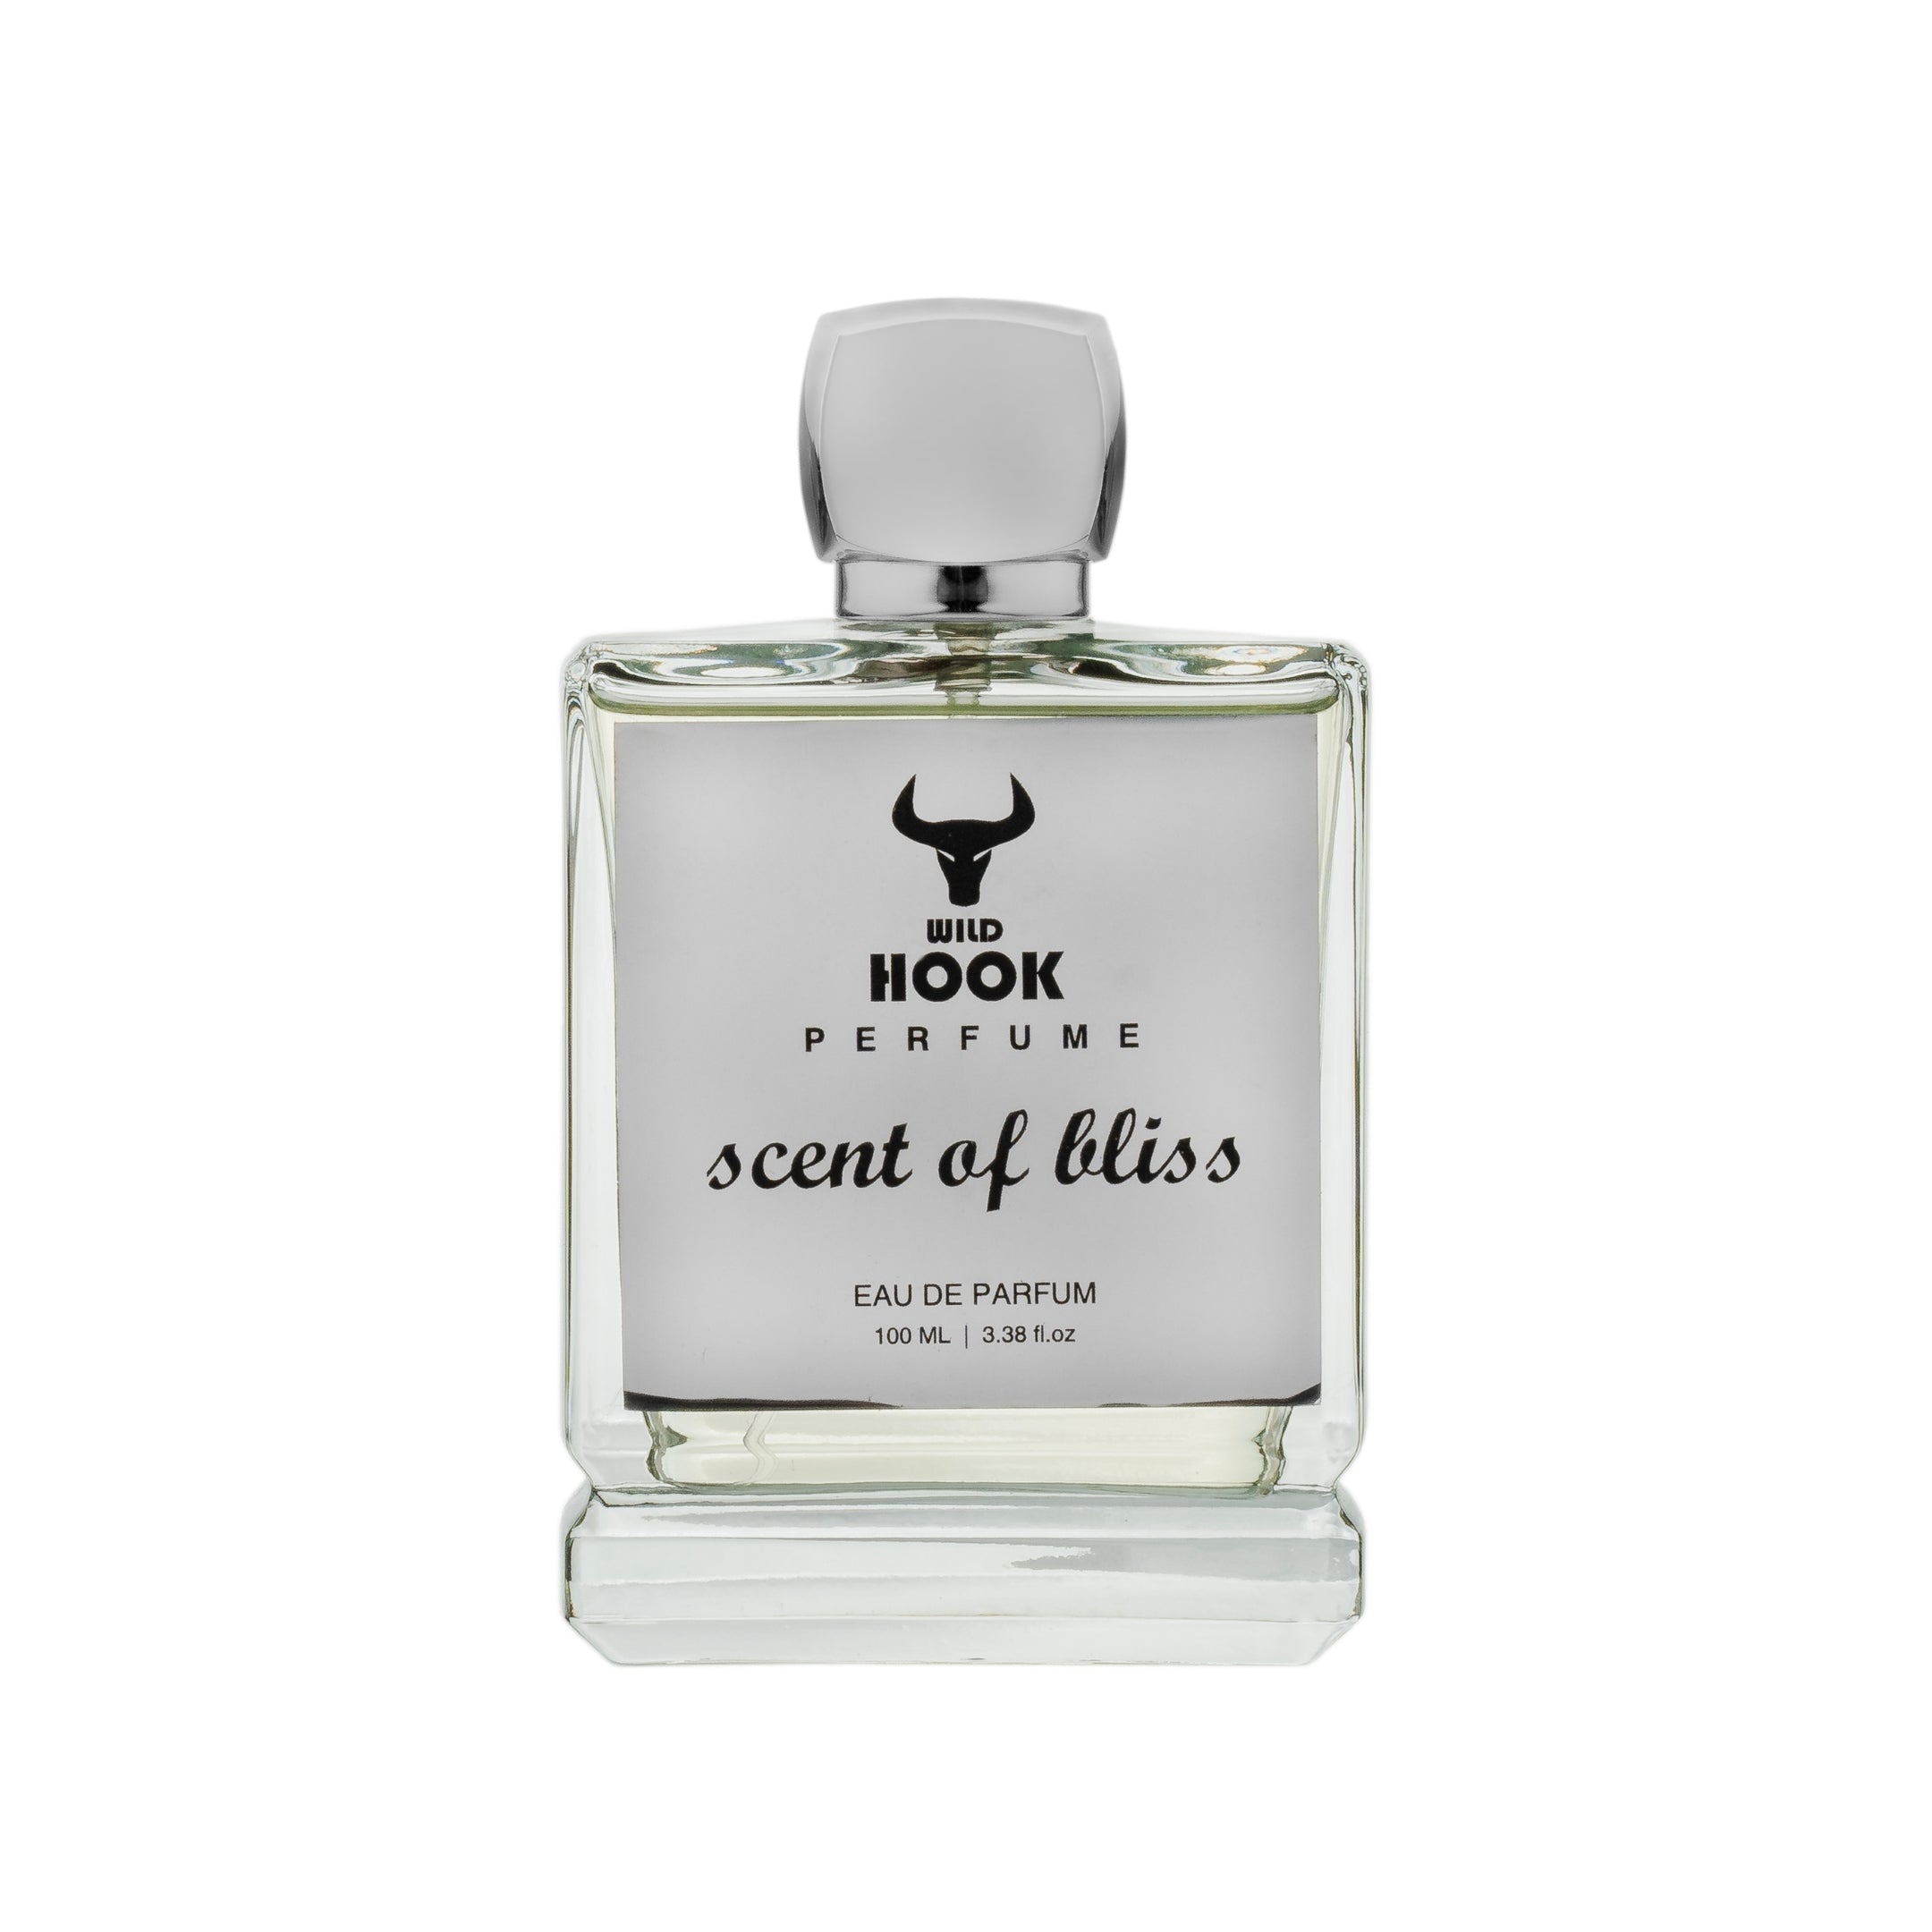 WILD HOOK- SCENT OF BLISS